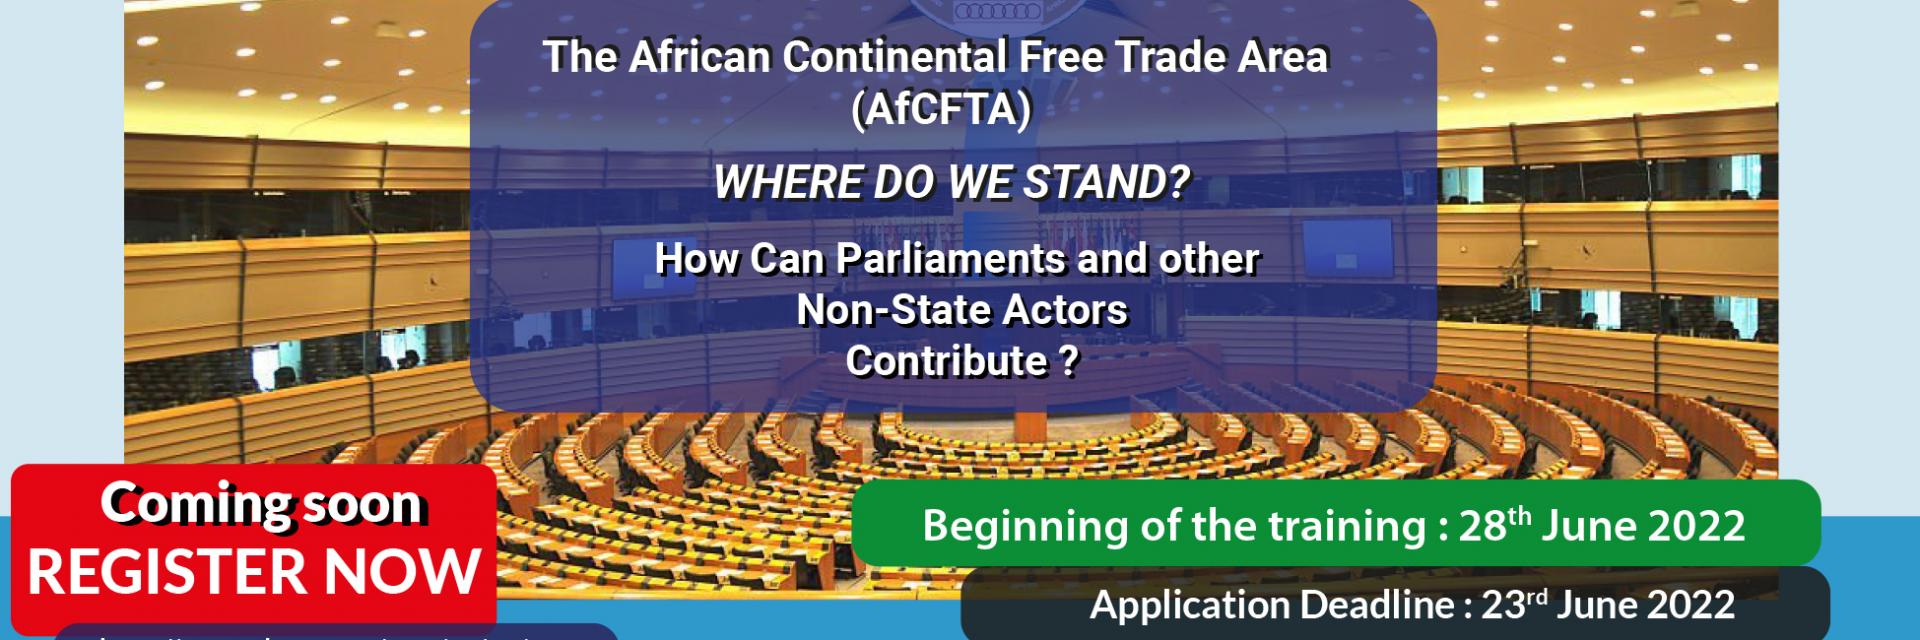 Call for Registration - Q&A on AfCFTA and the Role of non-State Actors